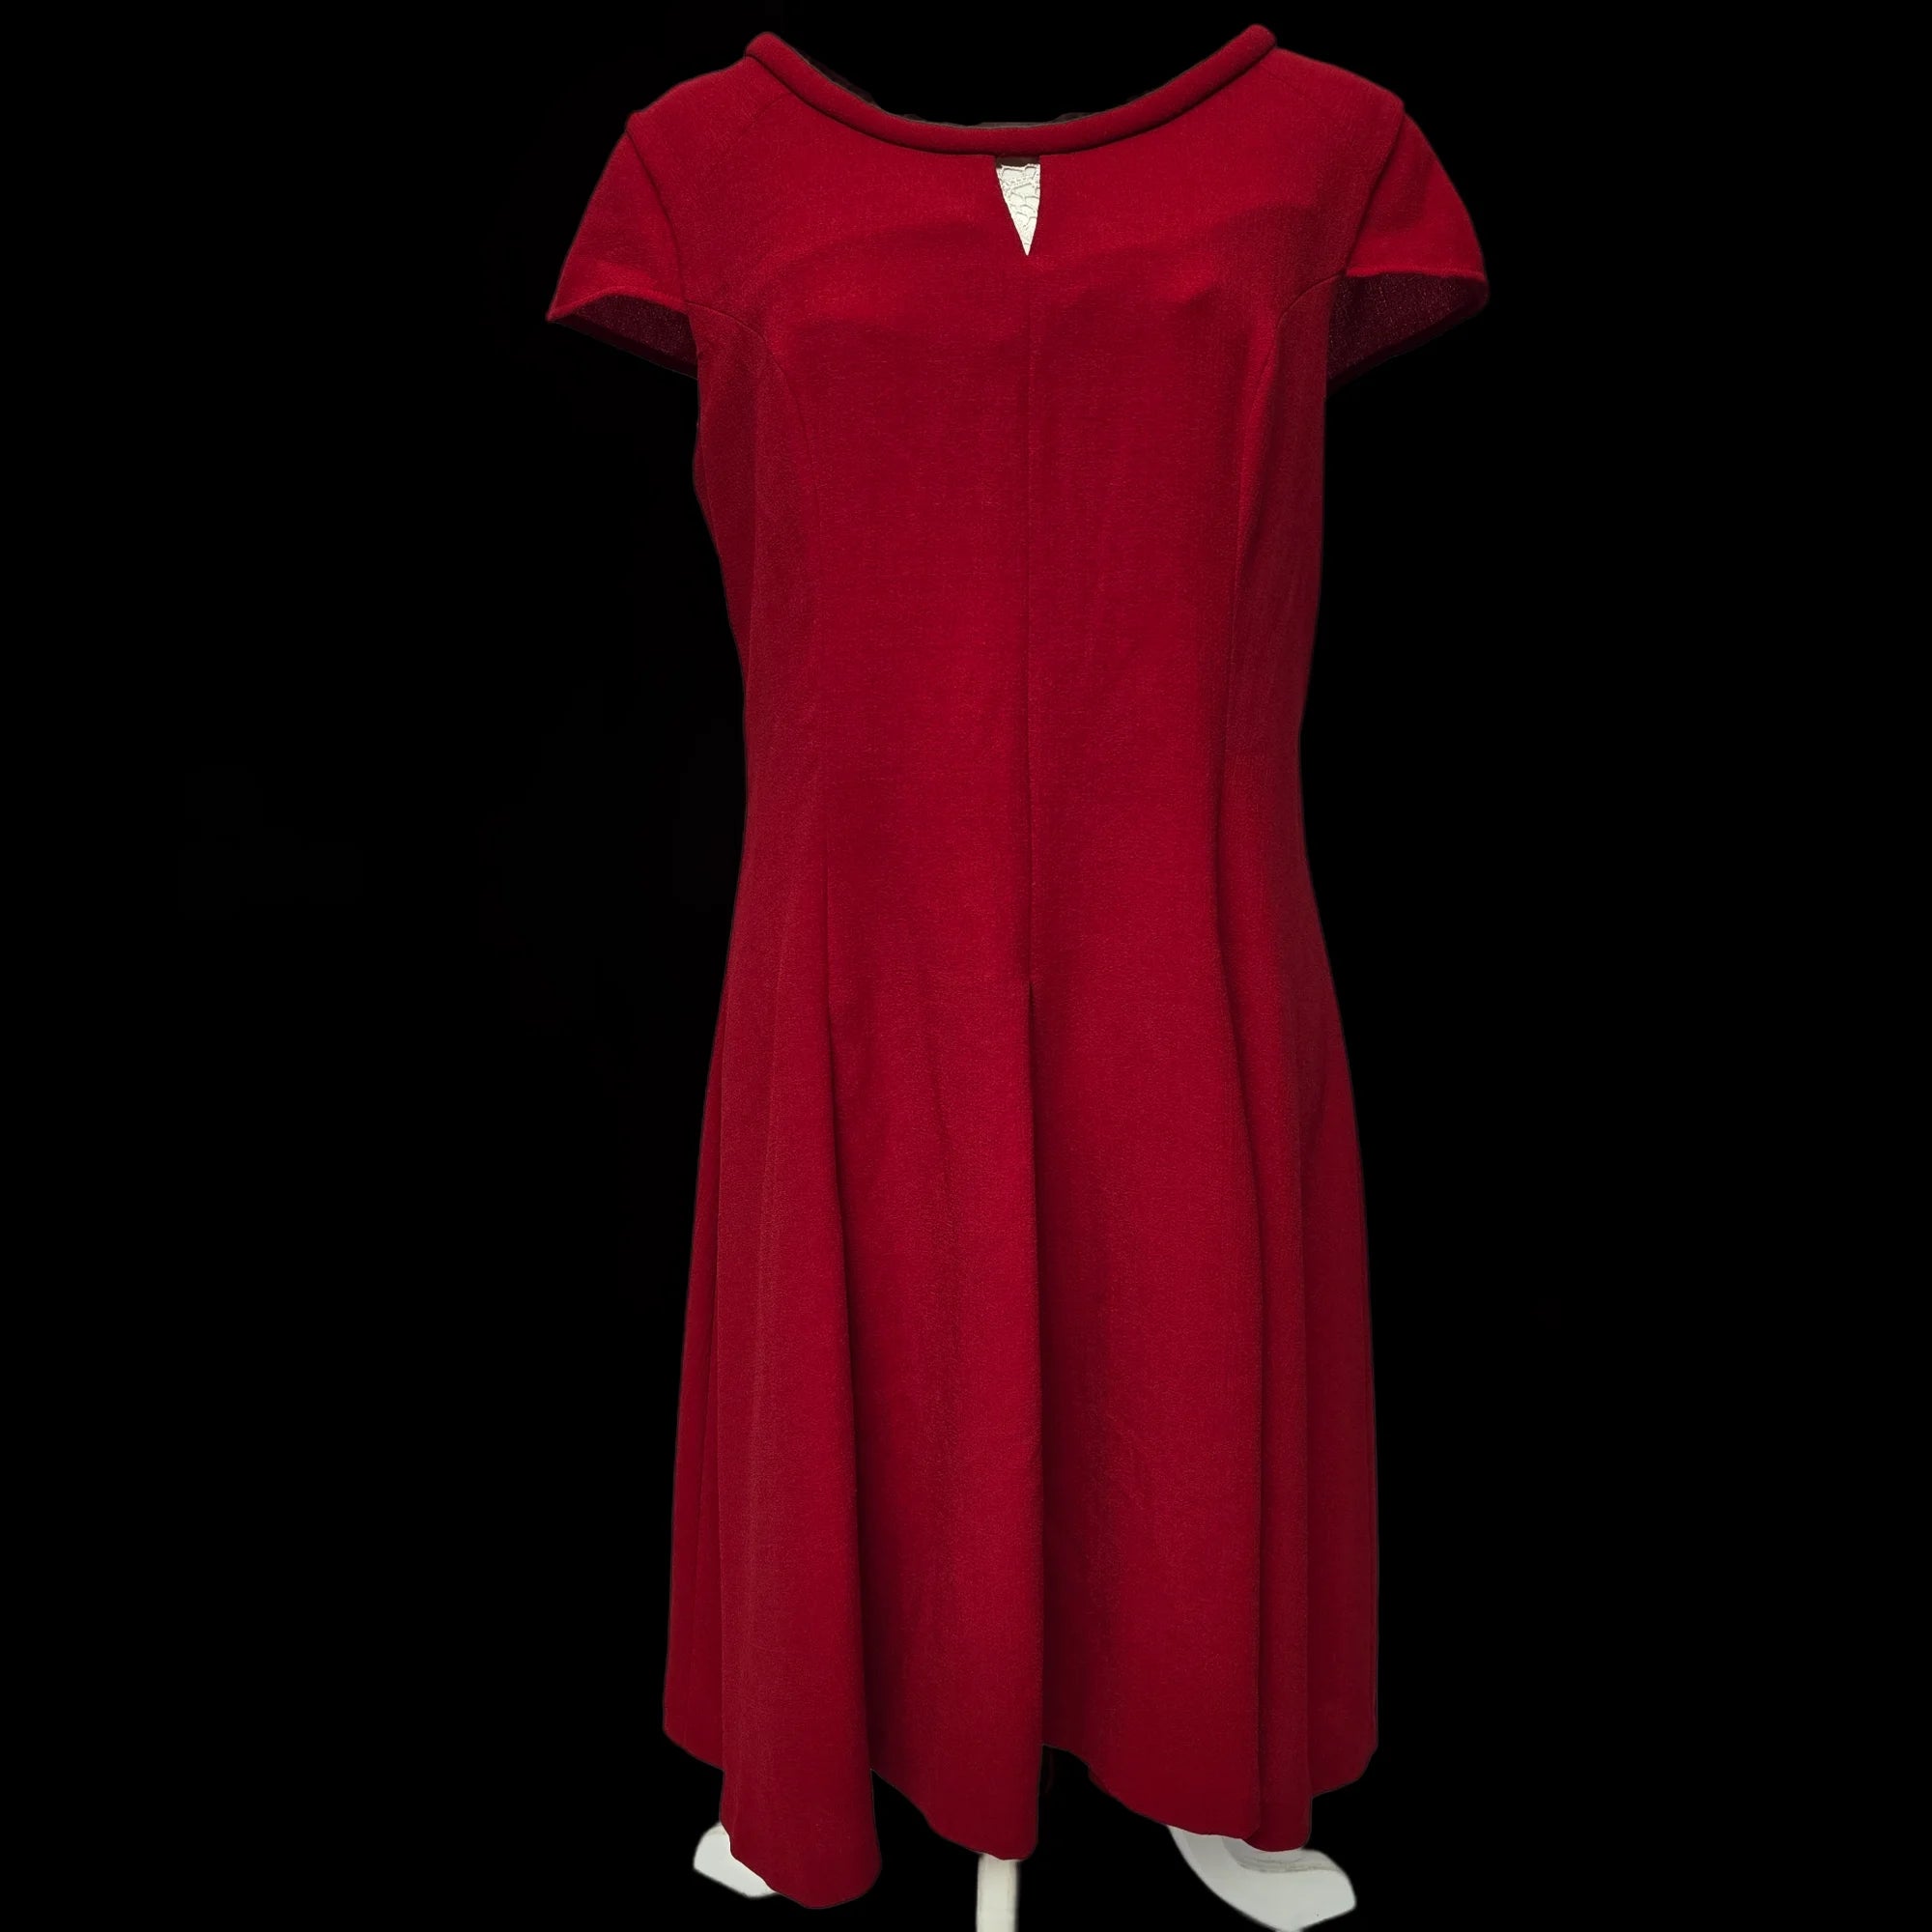 Womens Next Red Fit And Flare Dress UK 14 - Dresses - 1